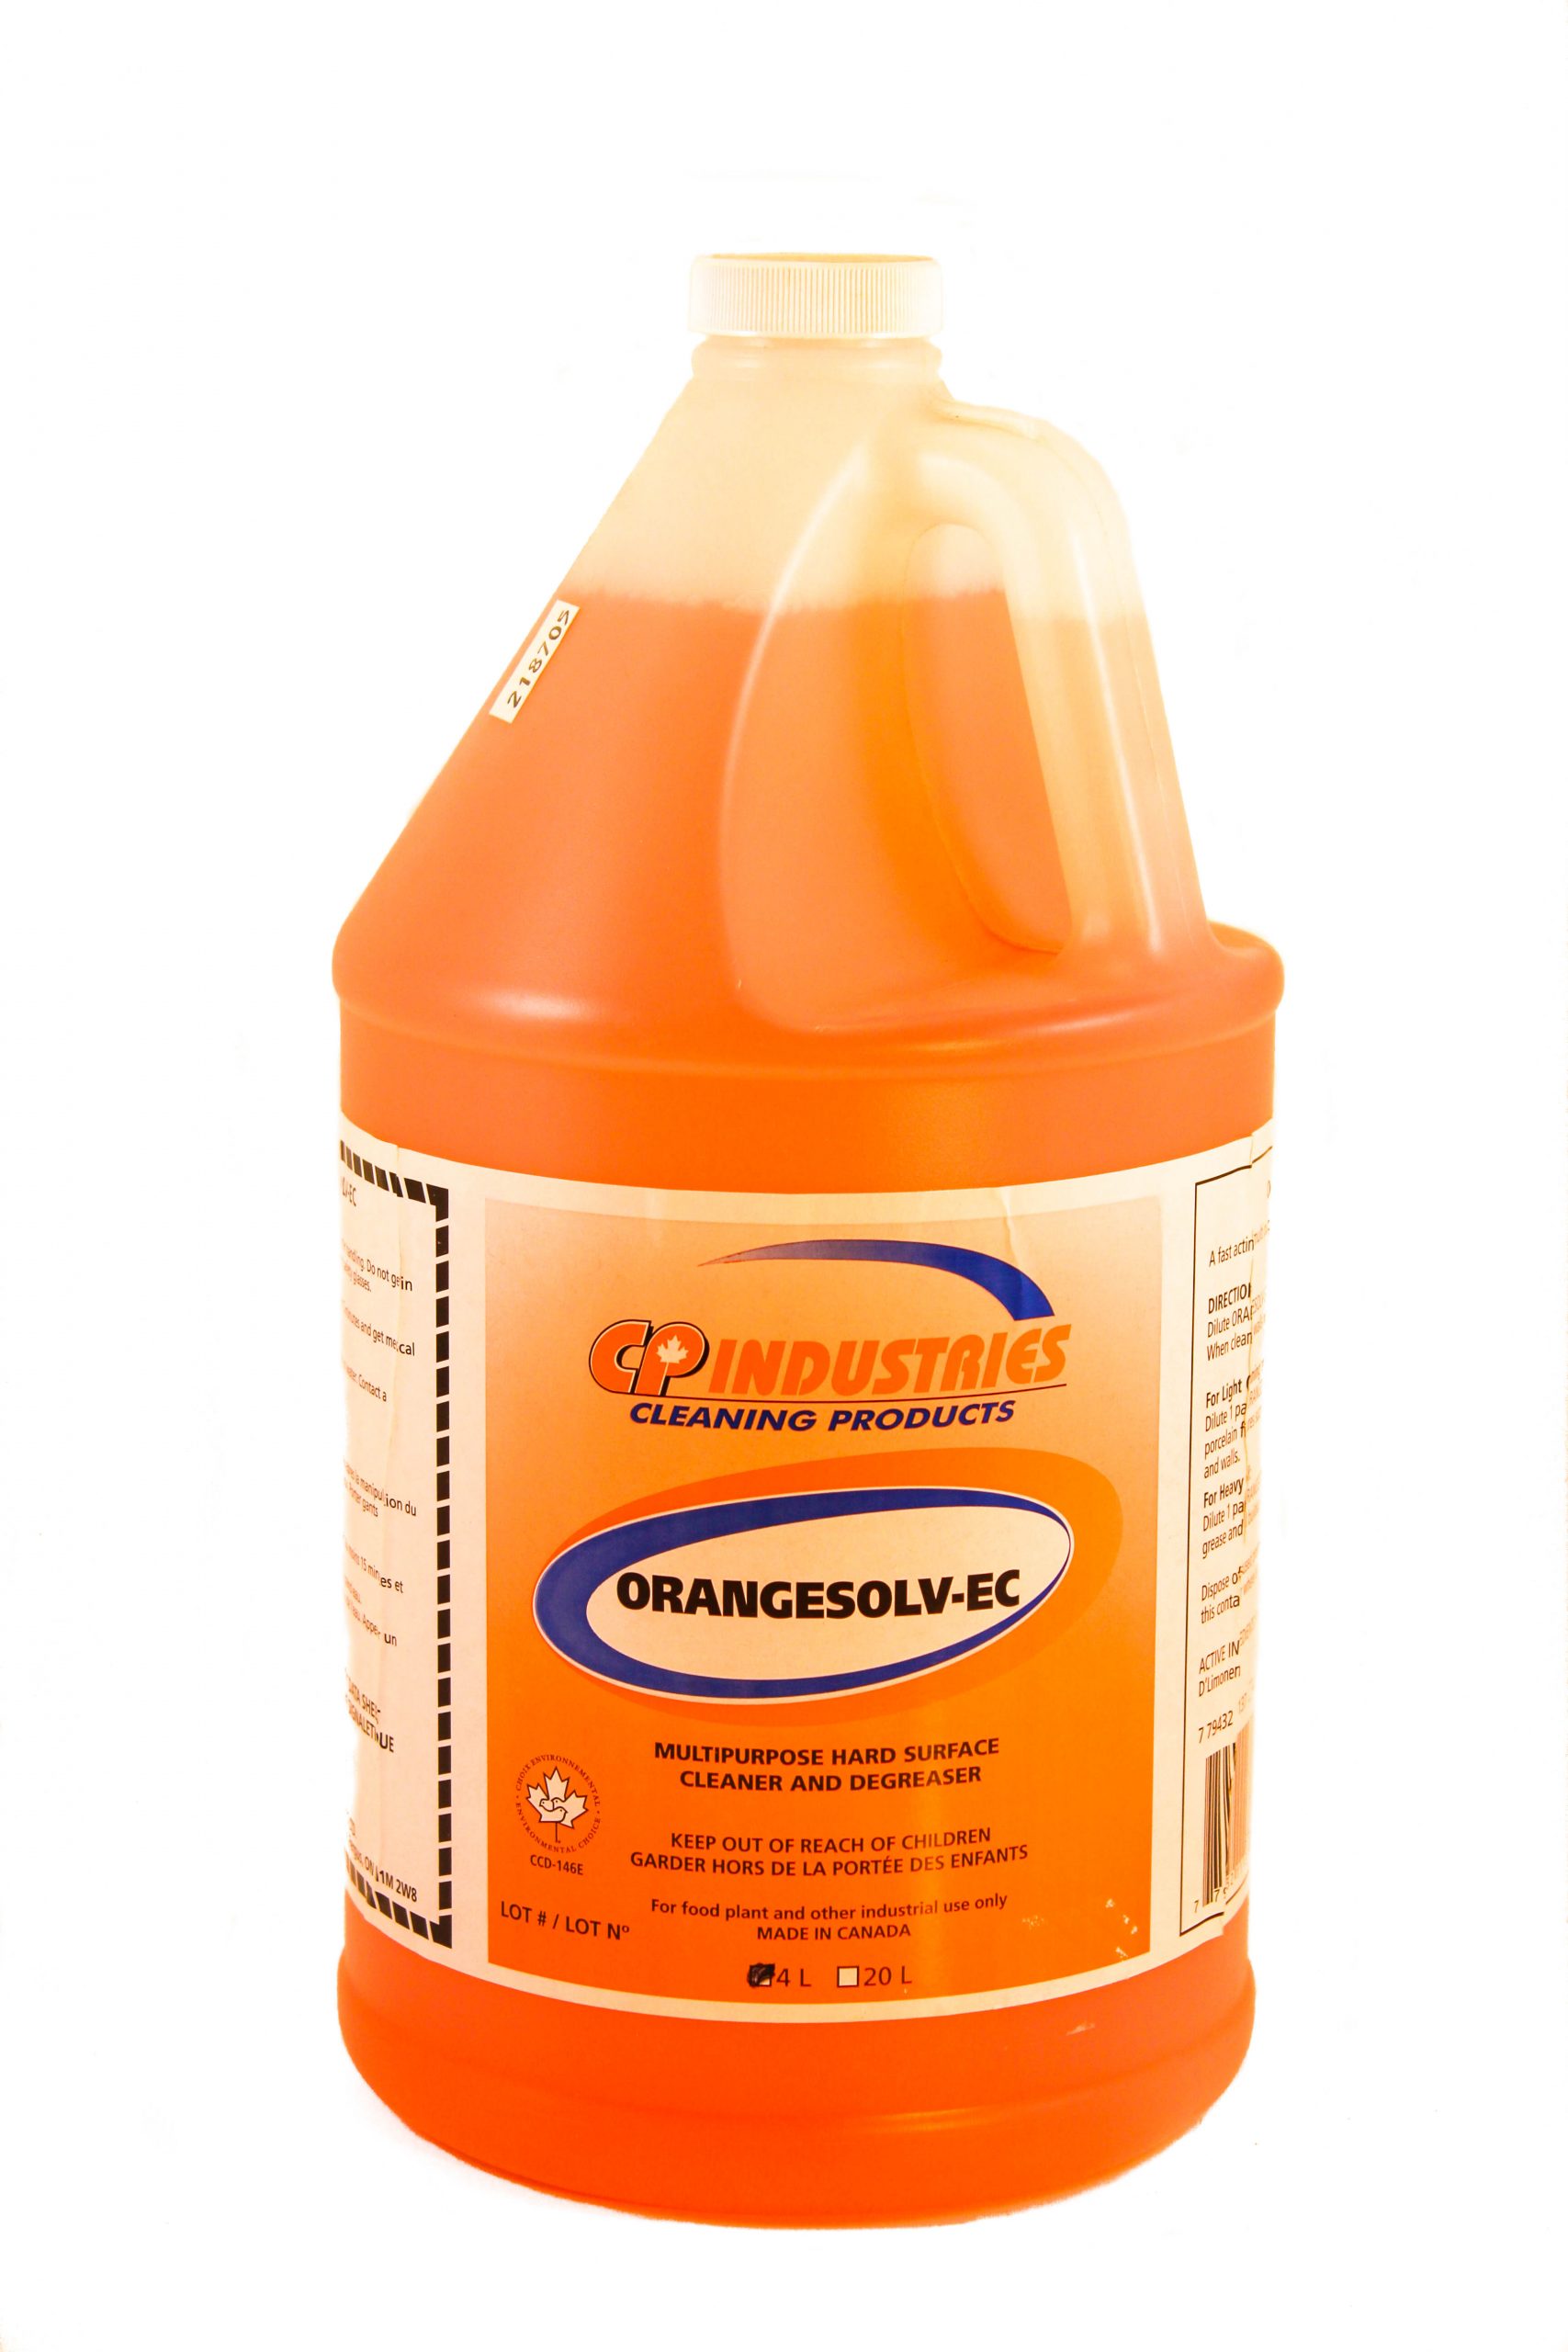 CP Industries: Orangesolv-EC, multipurpose hard surface cleaner and degreaser